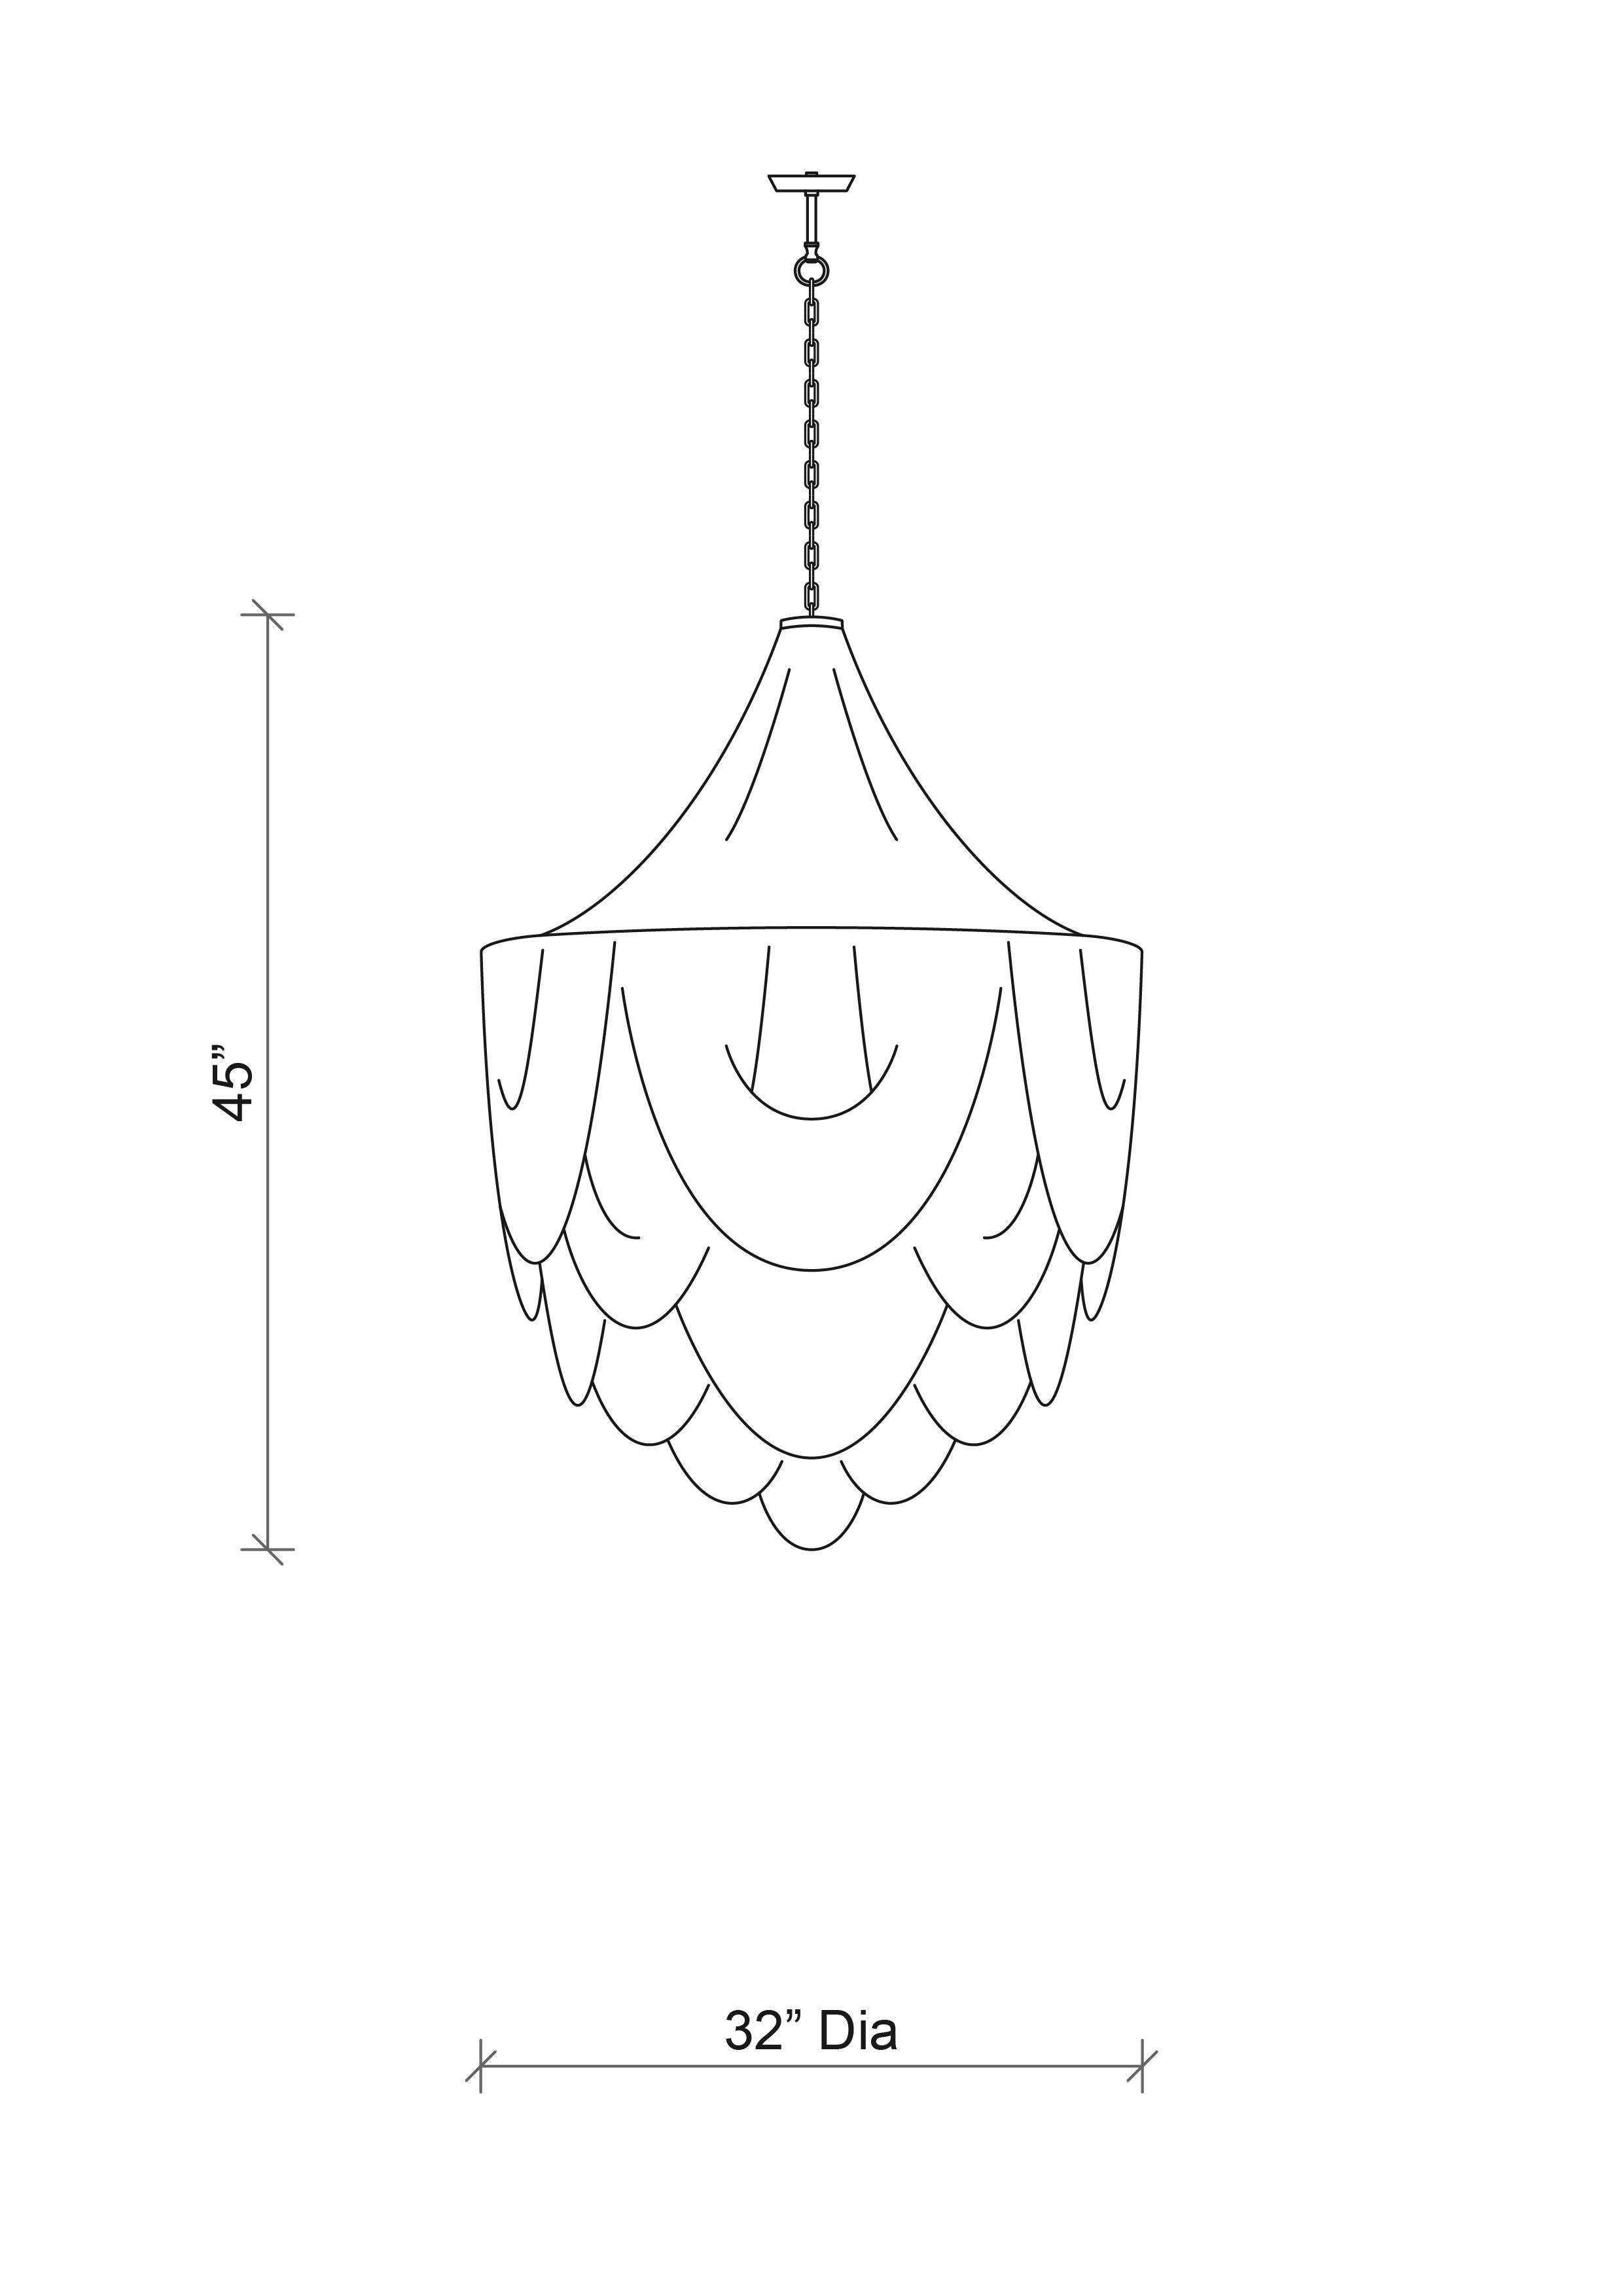 Large Round Whisper with Crown Leather Chandelier in Metallic Leather